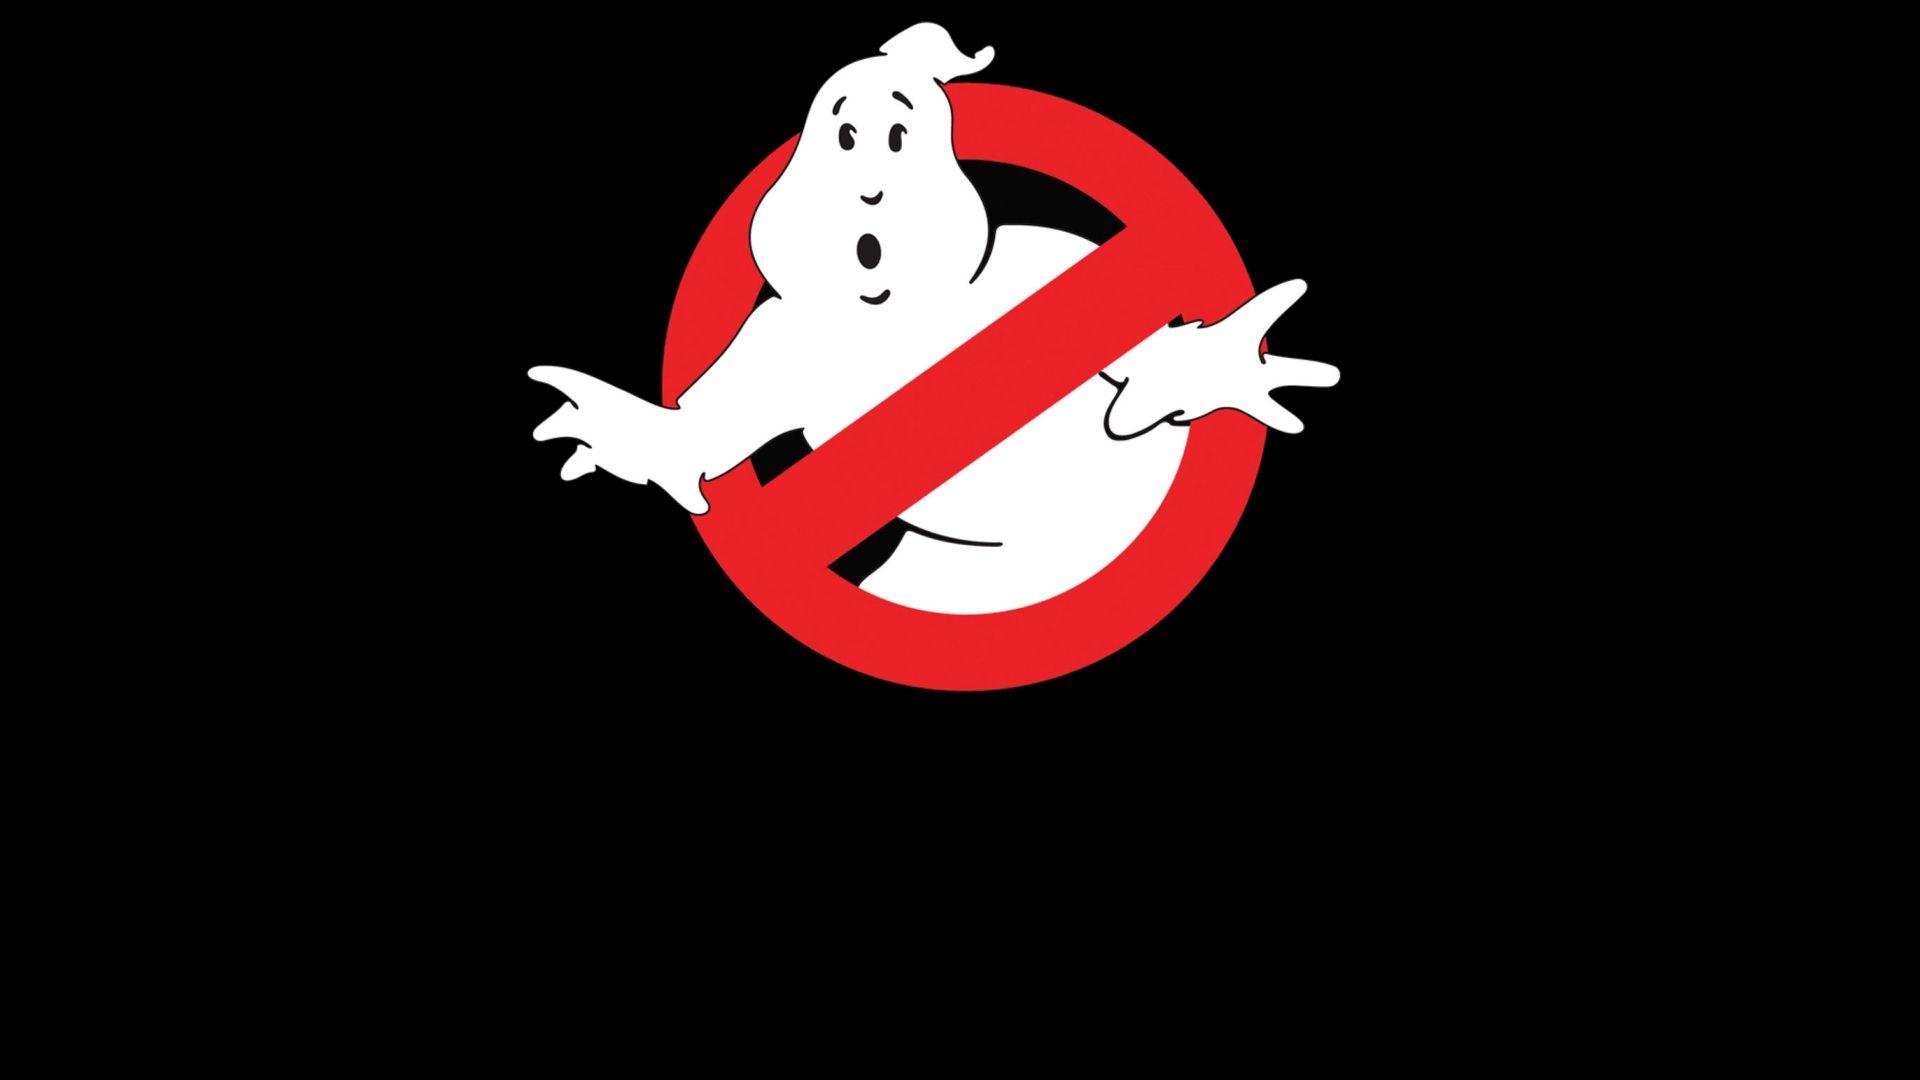 Ghostbusters Logo Wallpapers - Wallpaper Cave